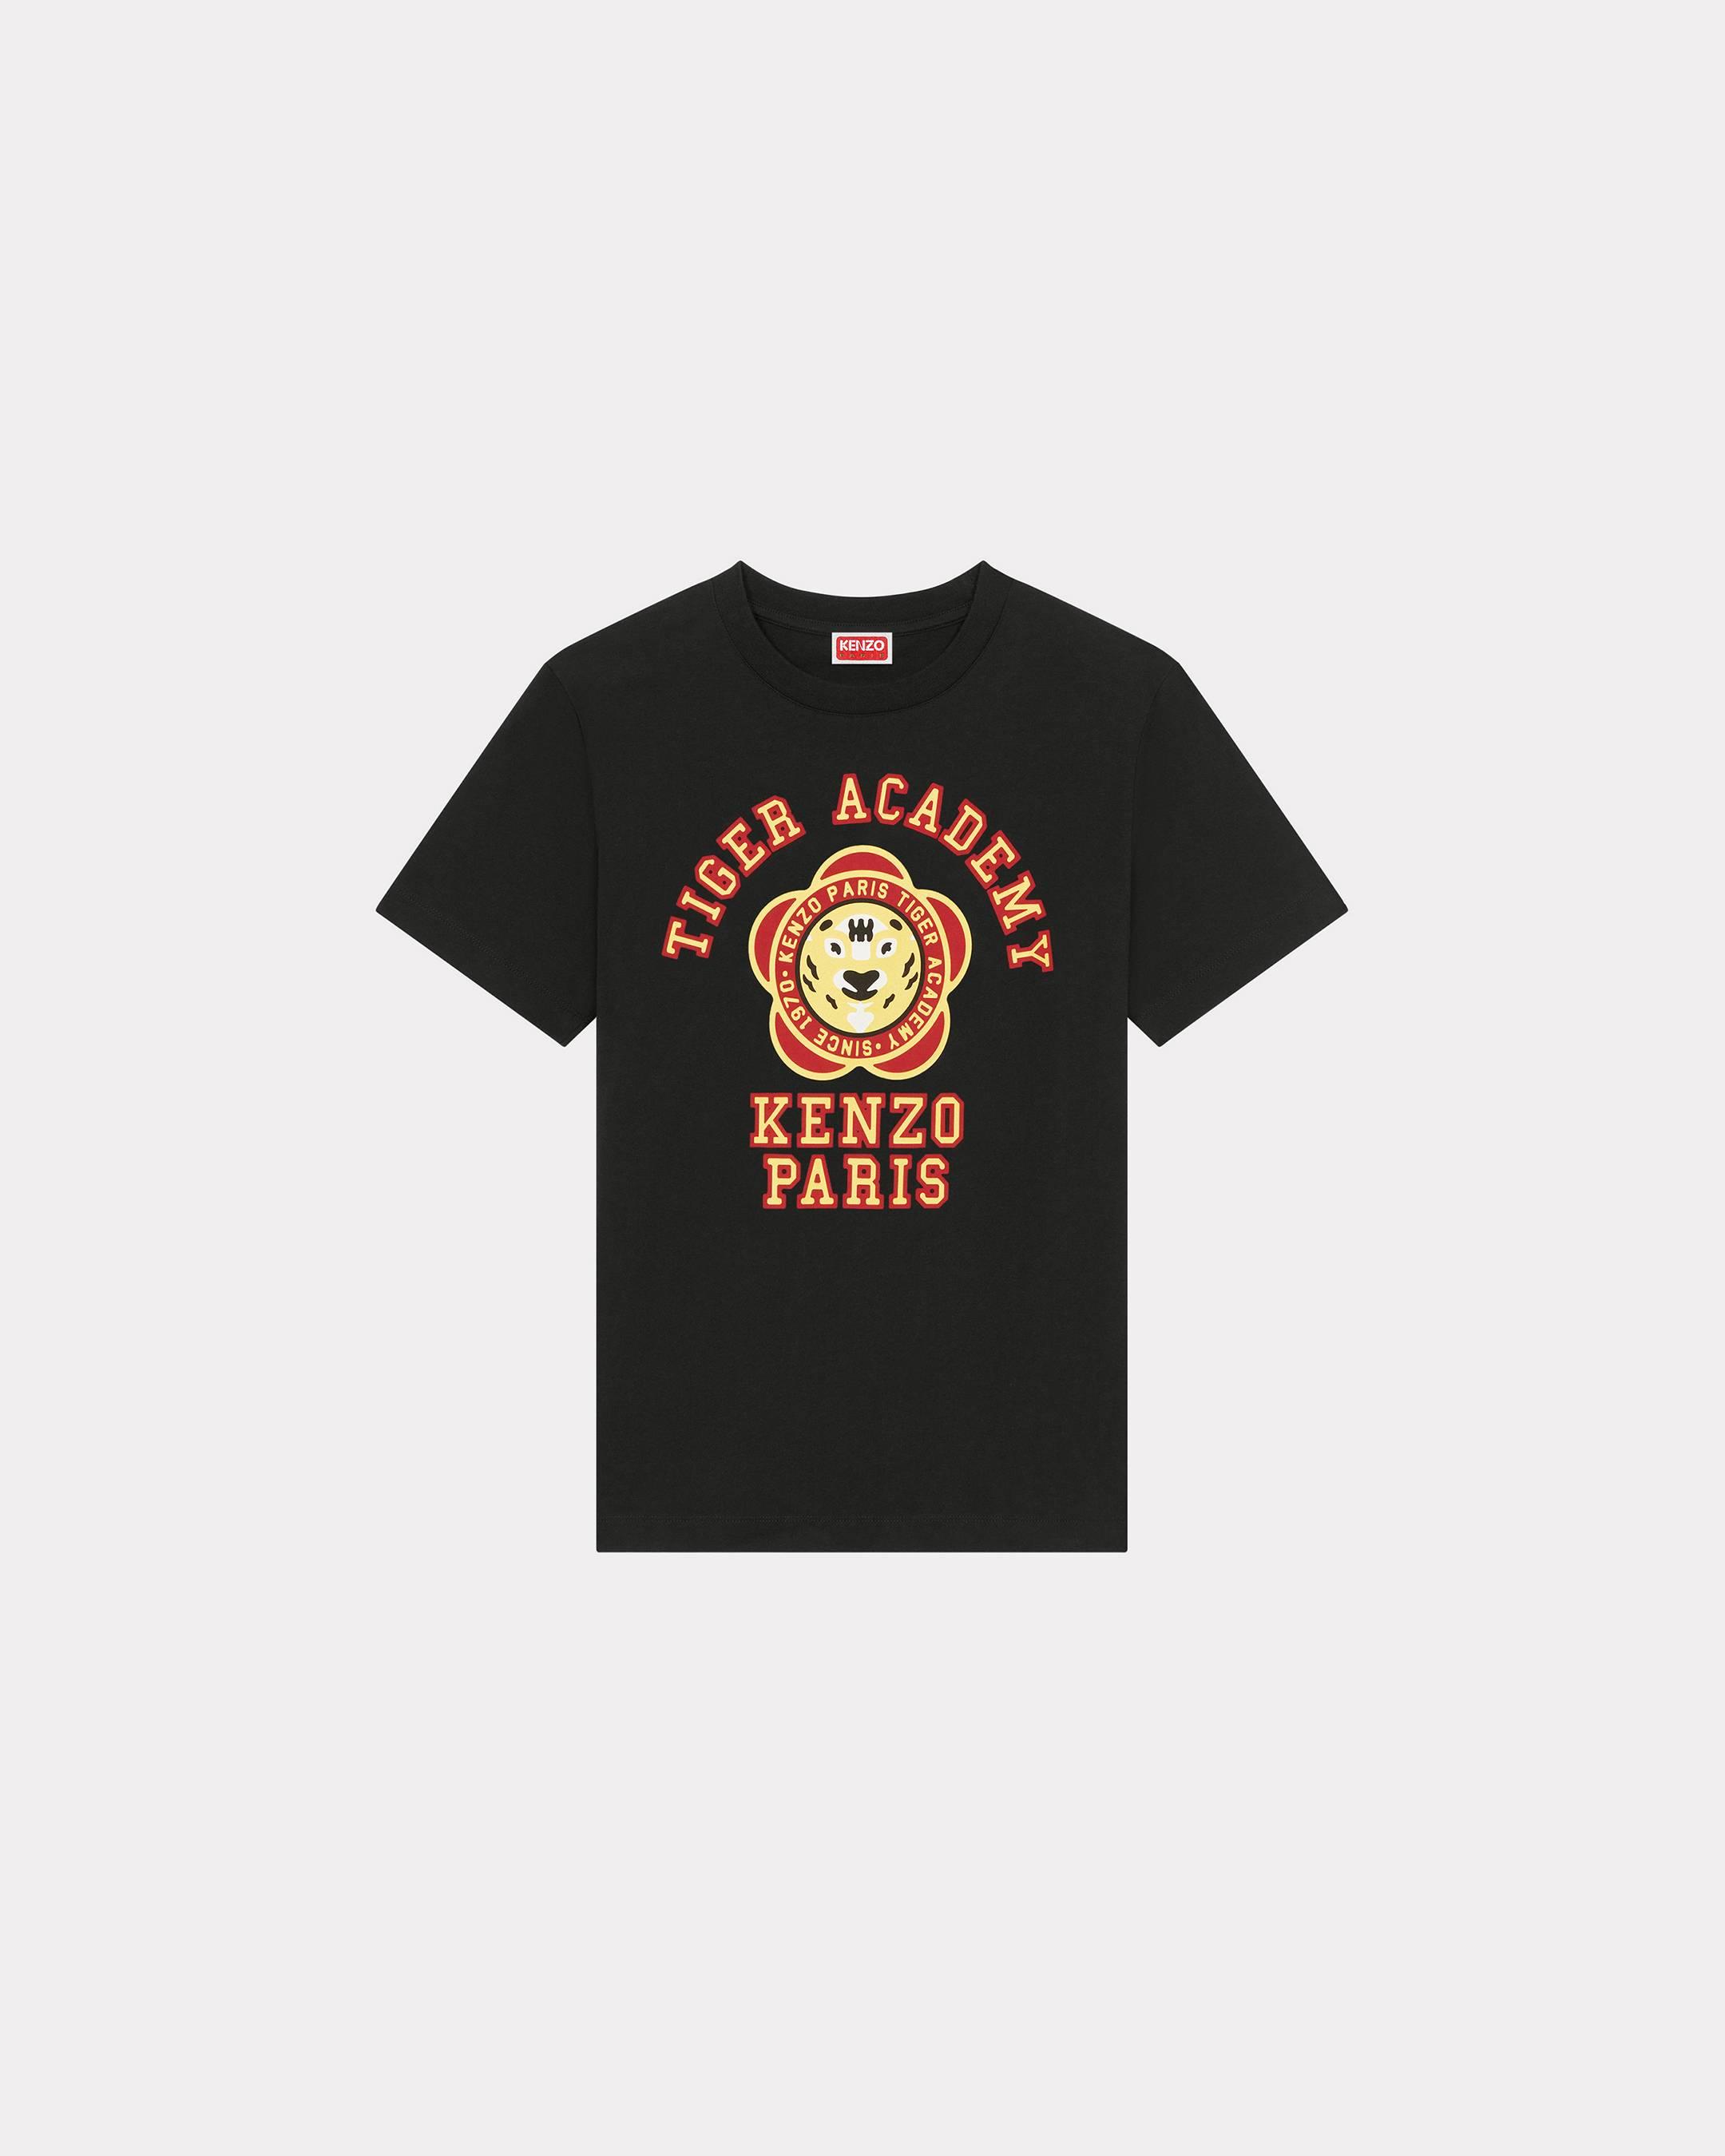 KENZO ' Tiger Academy' Loose T-shirt in Black | Lyst